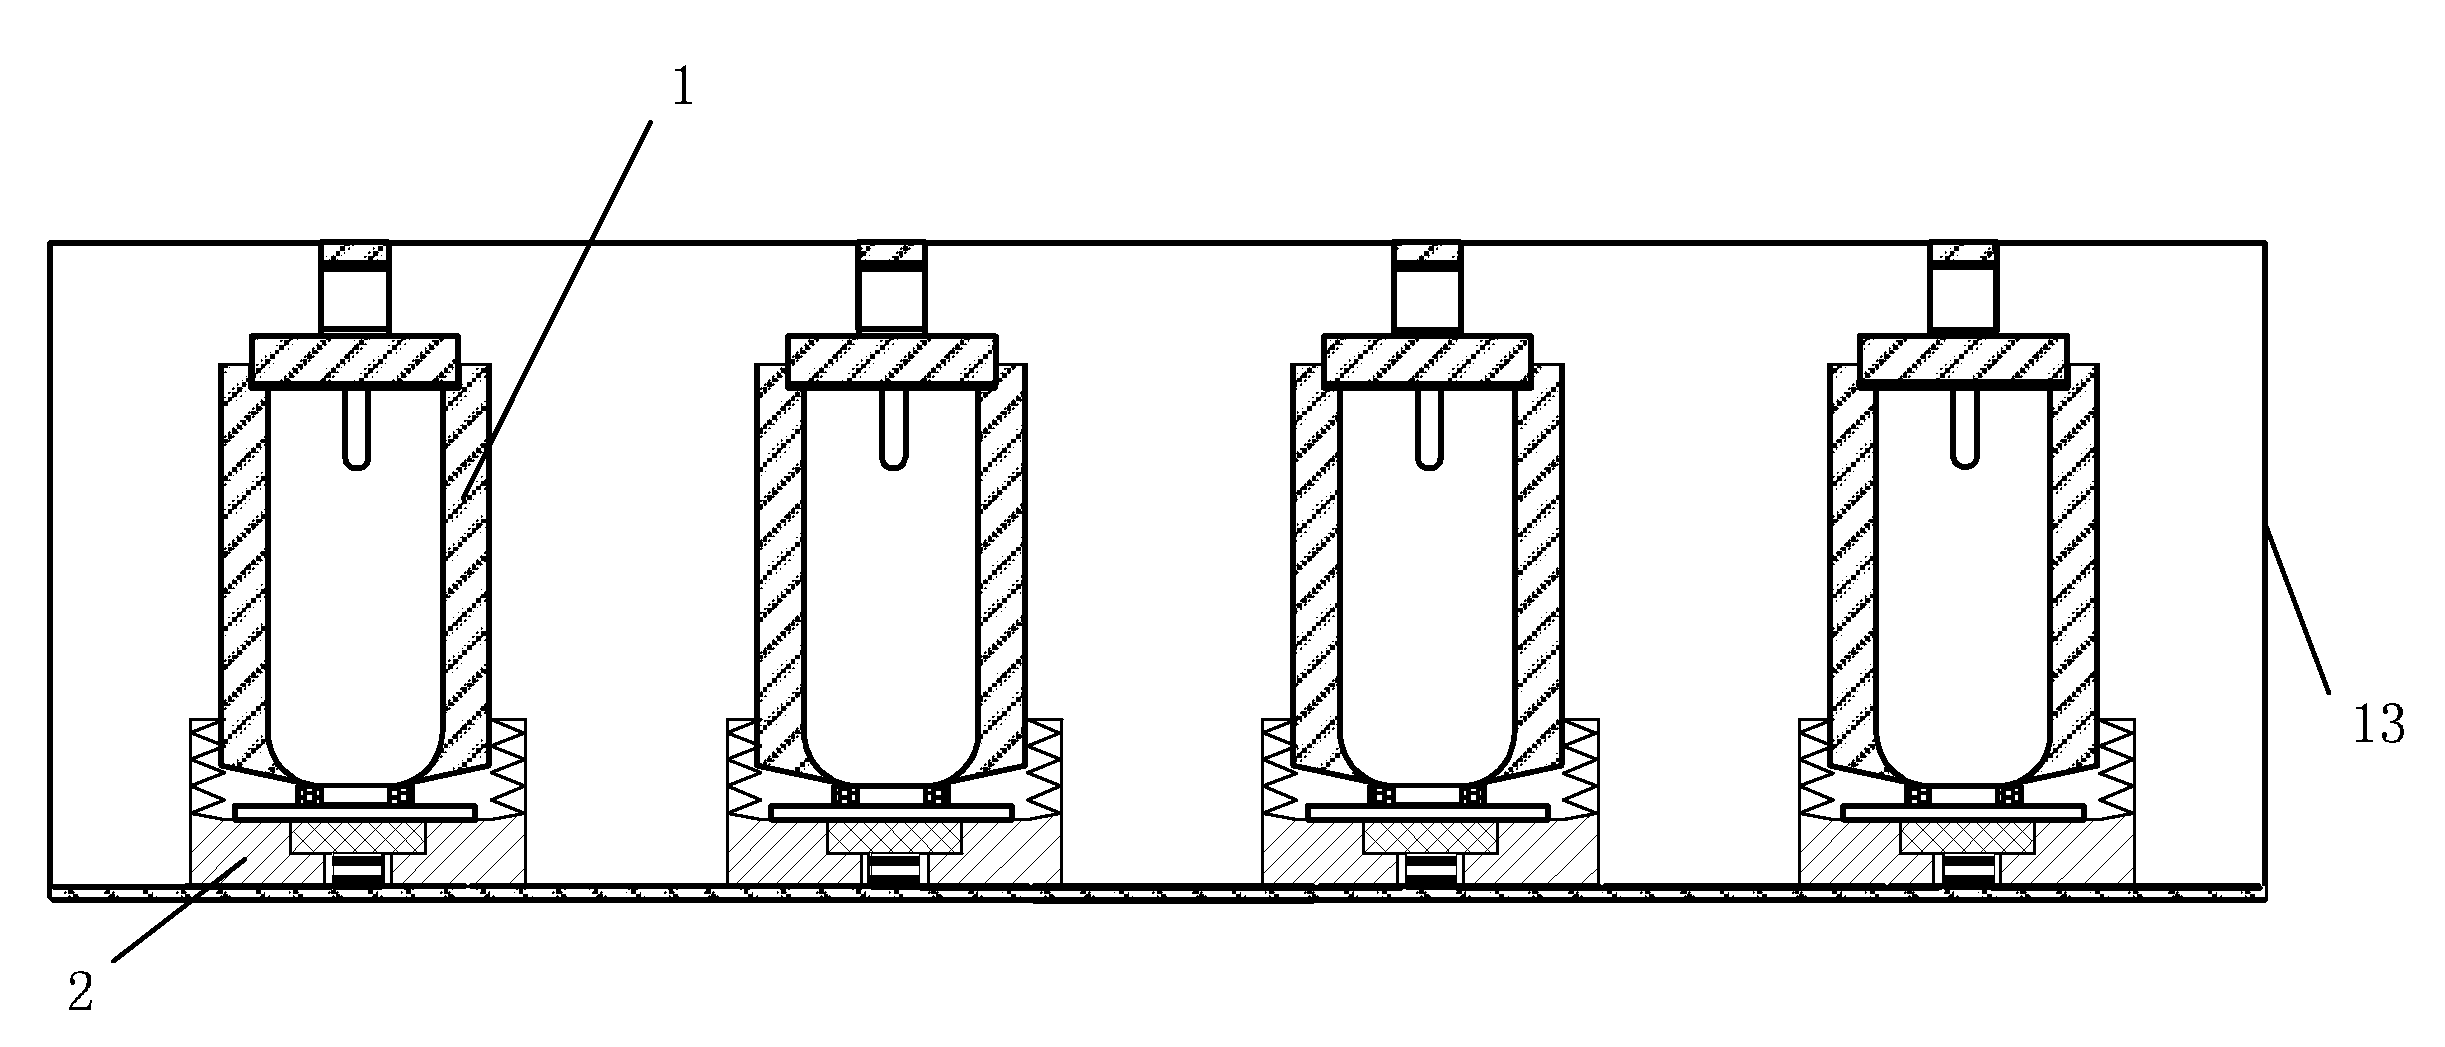 Device for measuring electrical treeing of medium voltage cables